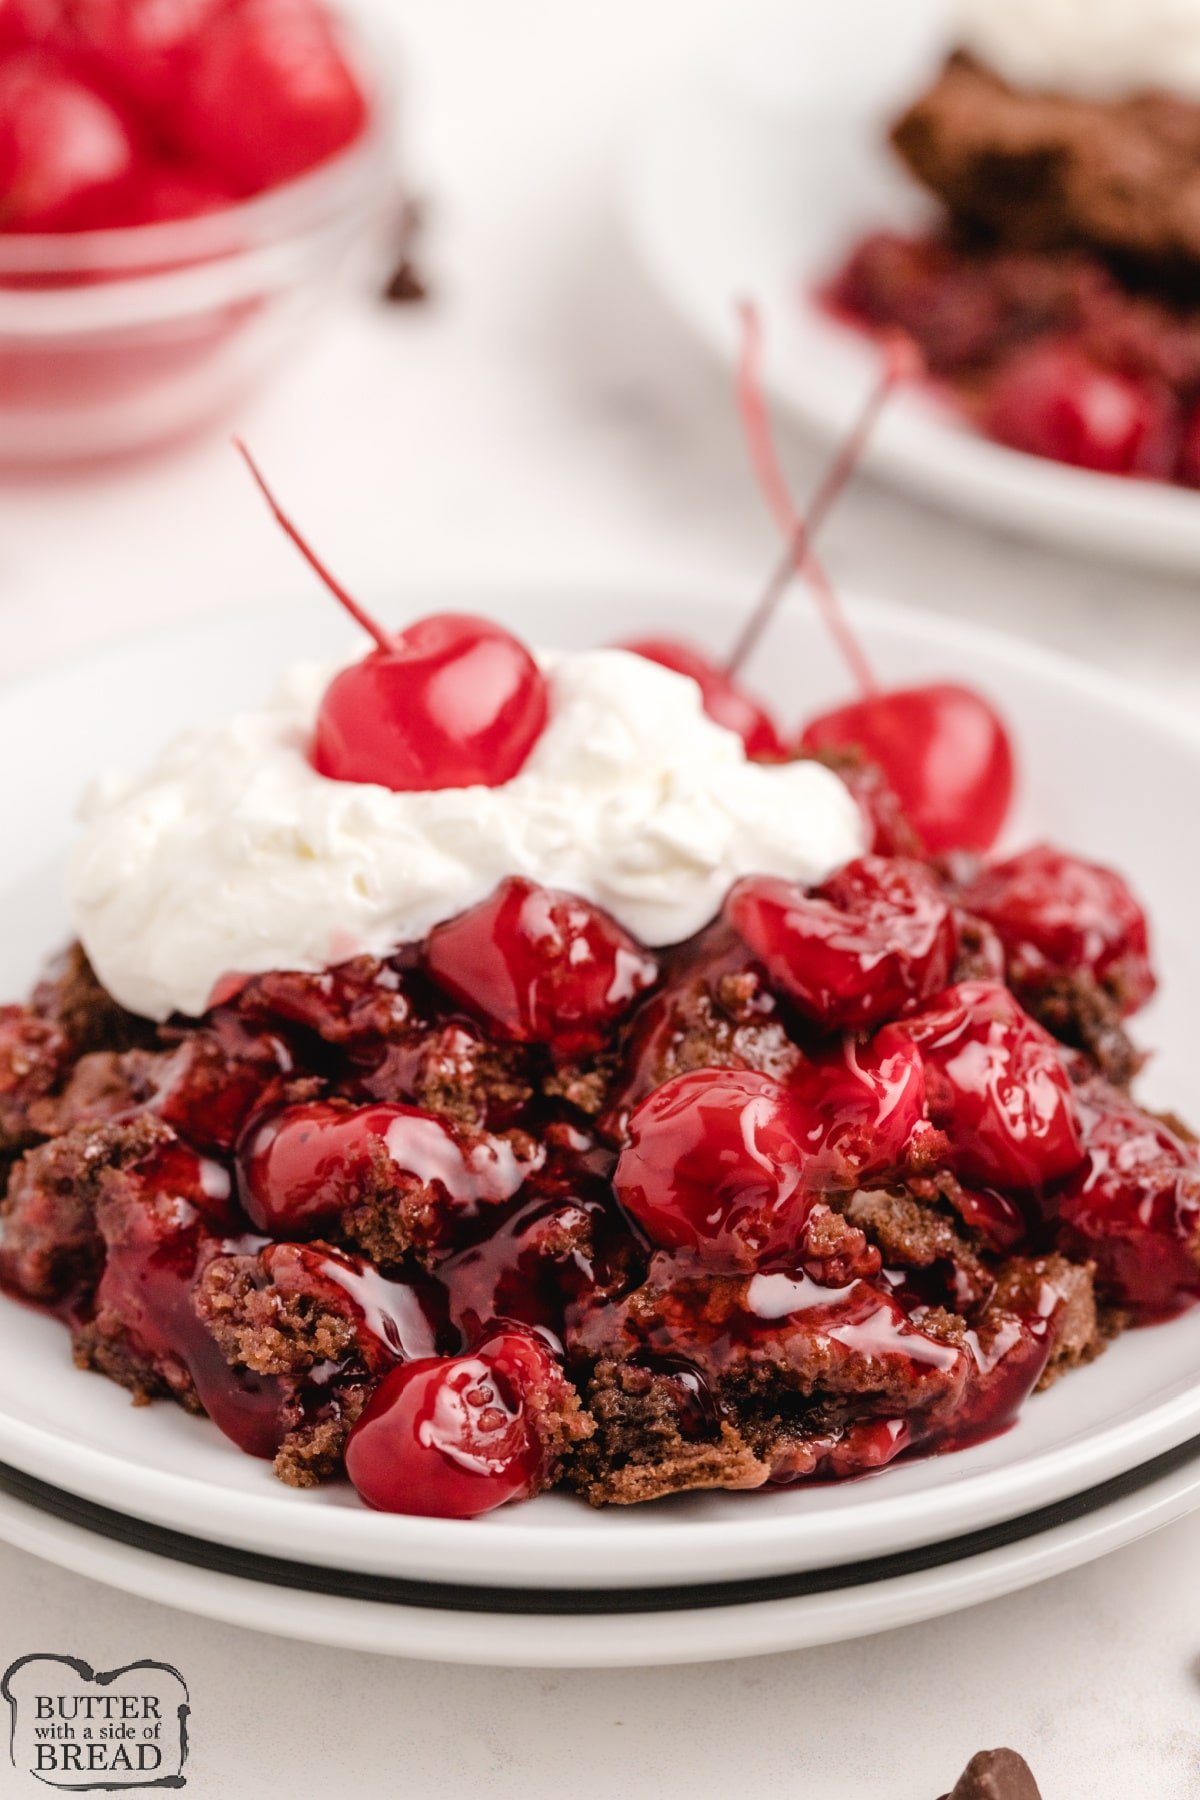 Chocolate Cherry Cobbler is a tasty variation on the traditional cherry cobbler recipe. Canned cherry pie filling baked with a simple crust made with melted chocolate chips. 